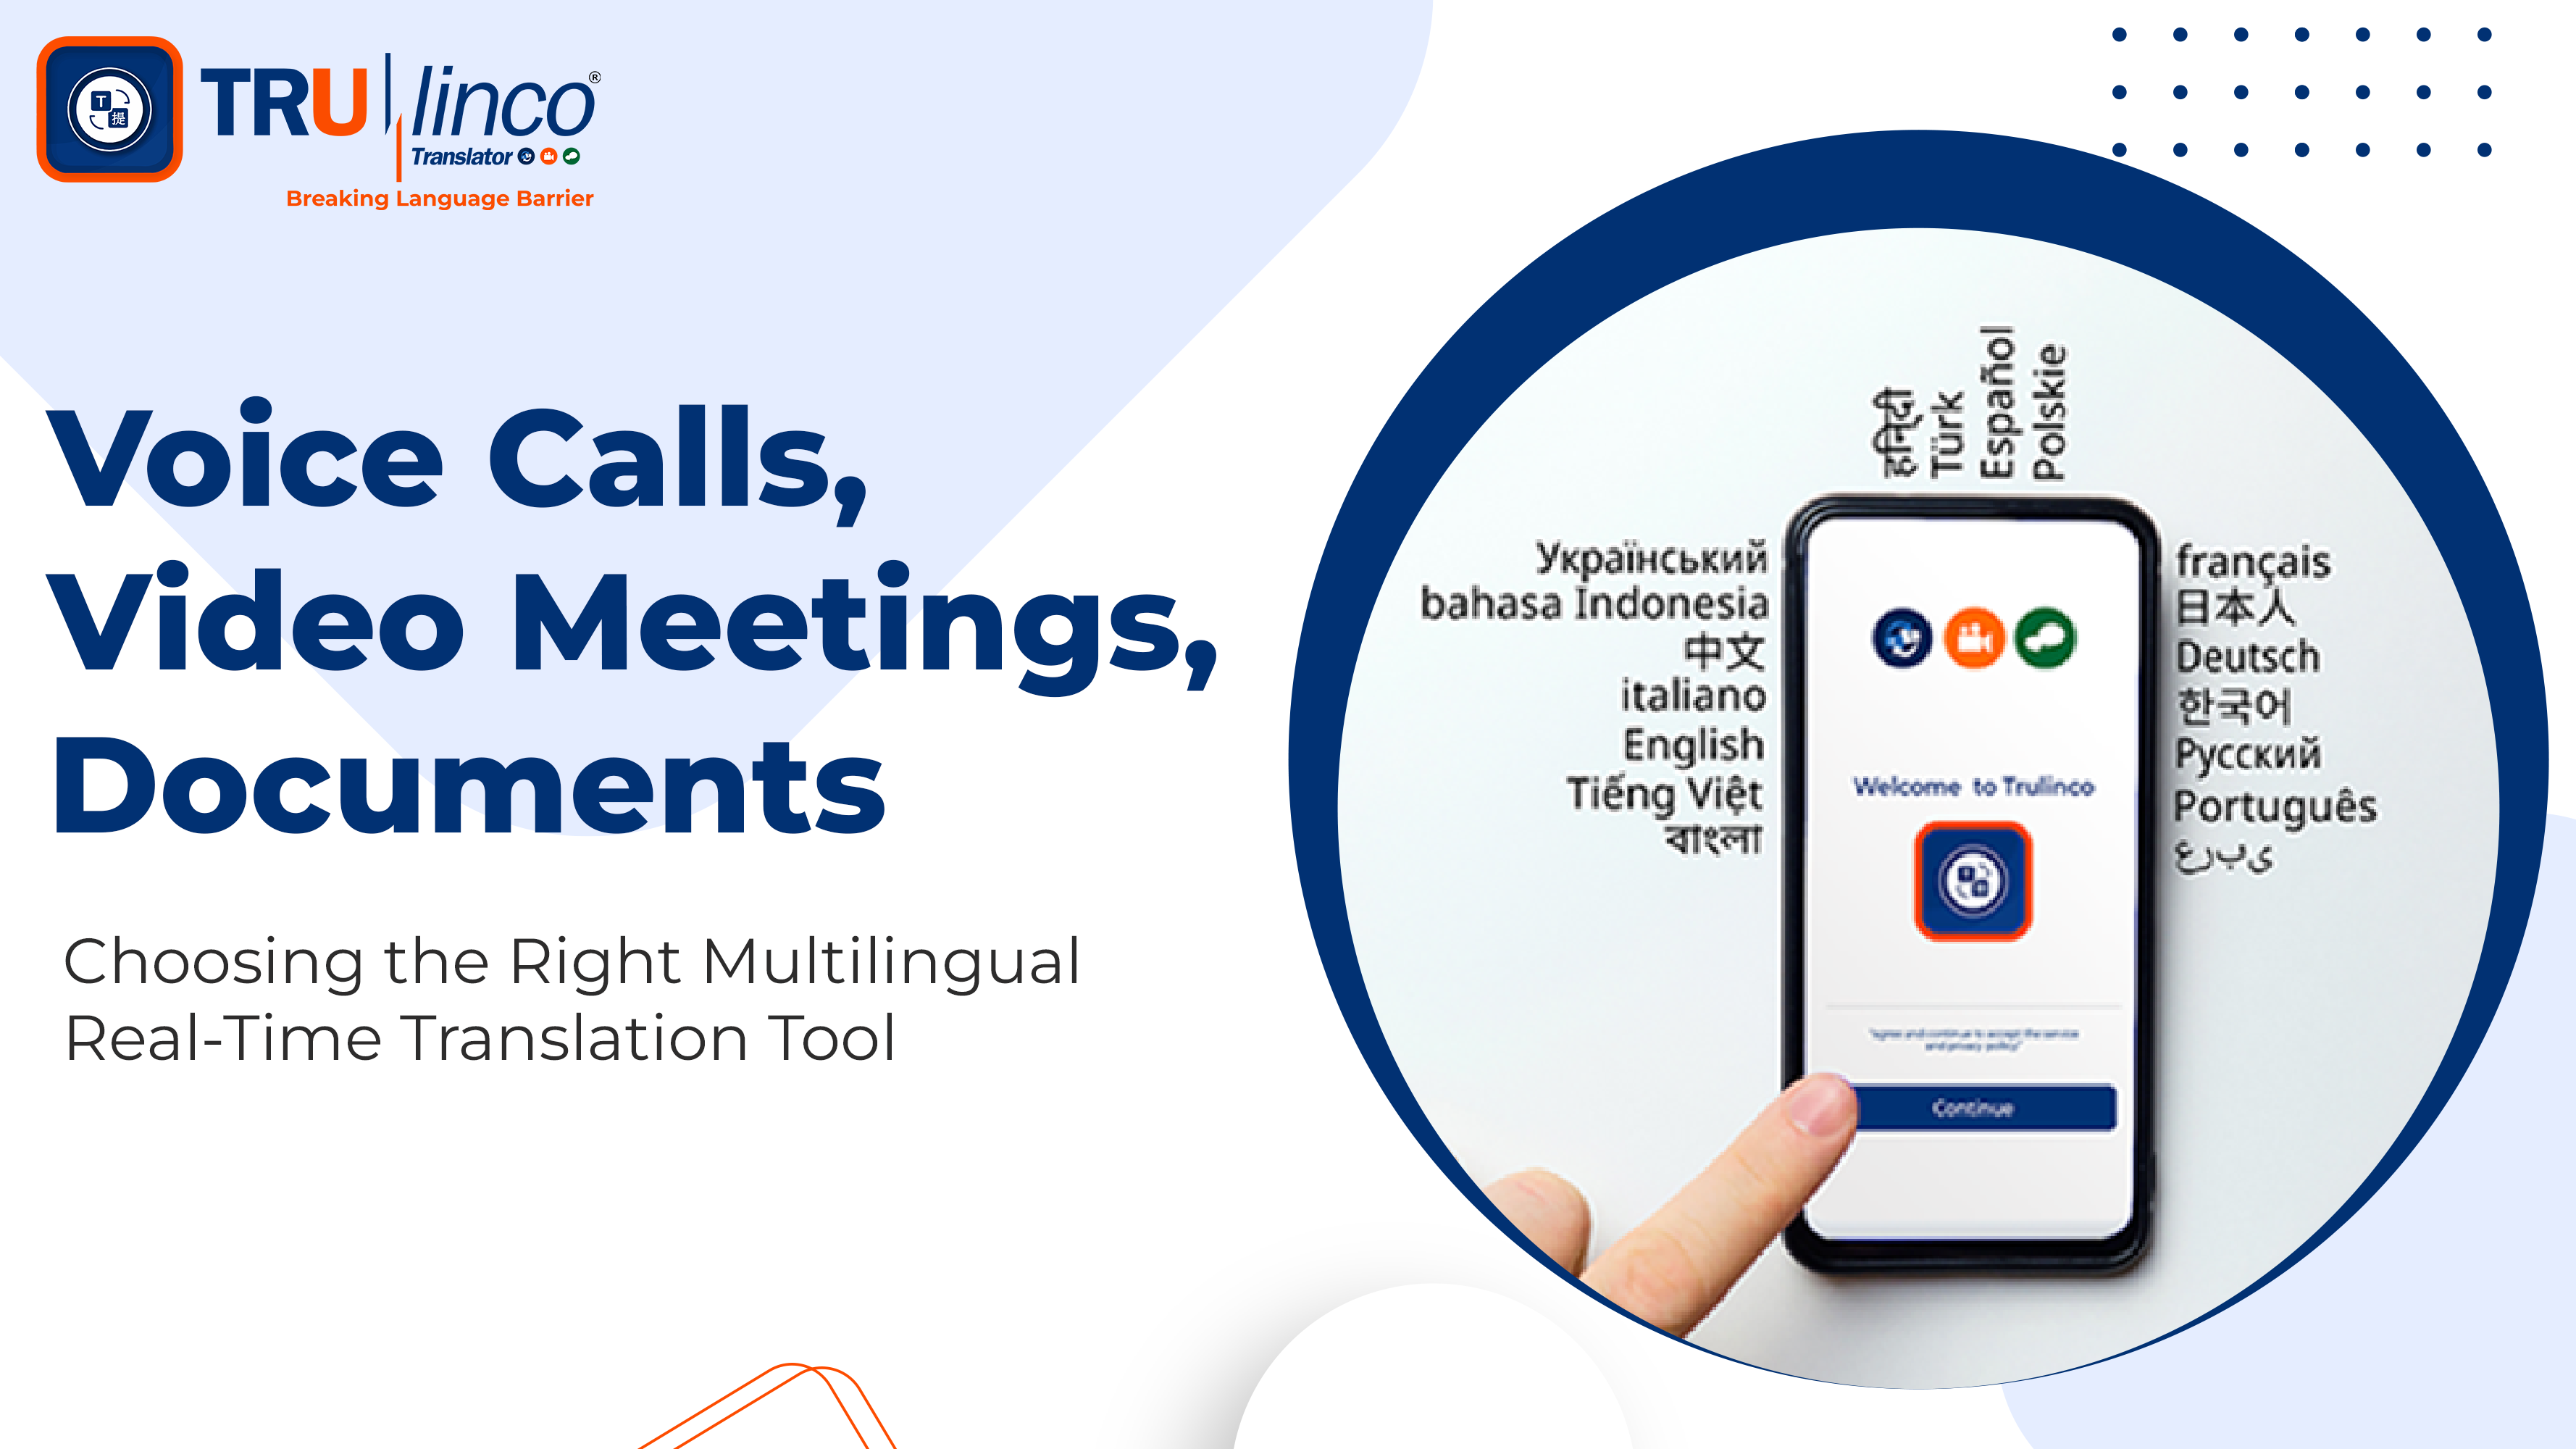 Voice Calls, Video Meetings, Documents Choosing the Right Multilingual Real-Time Translation Tool